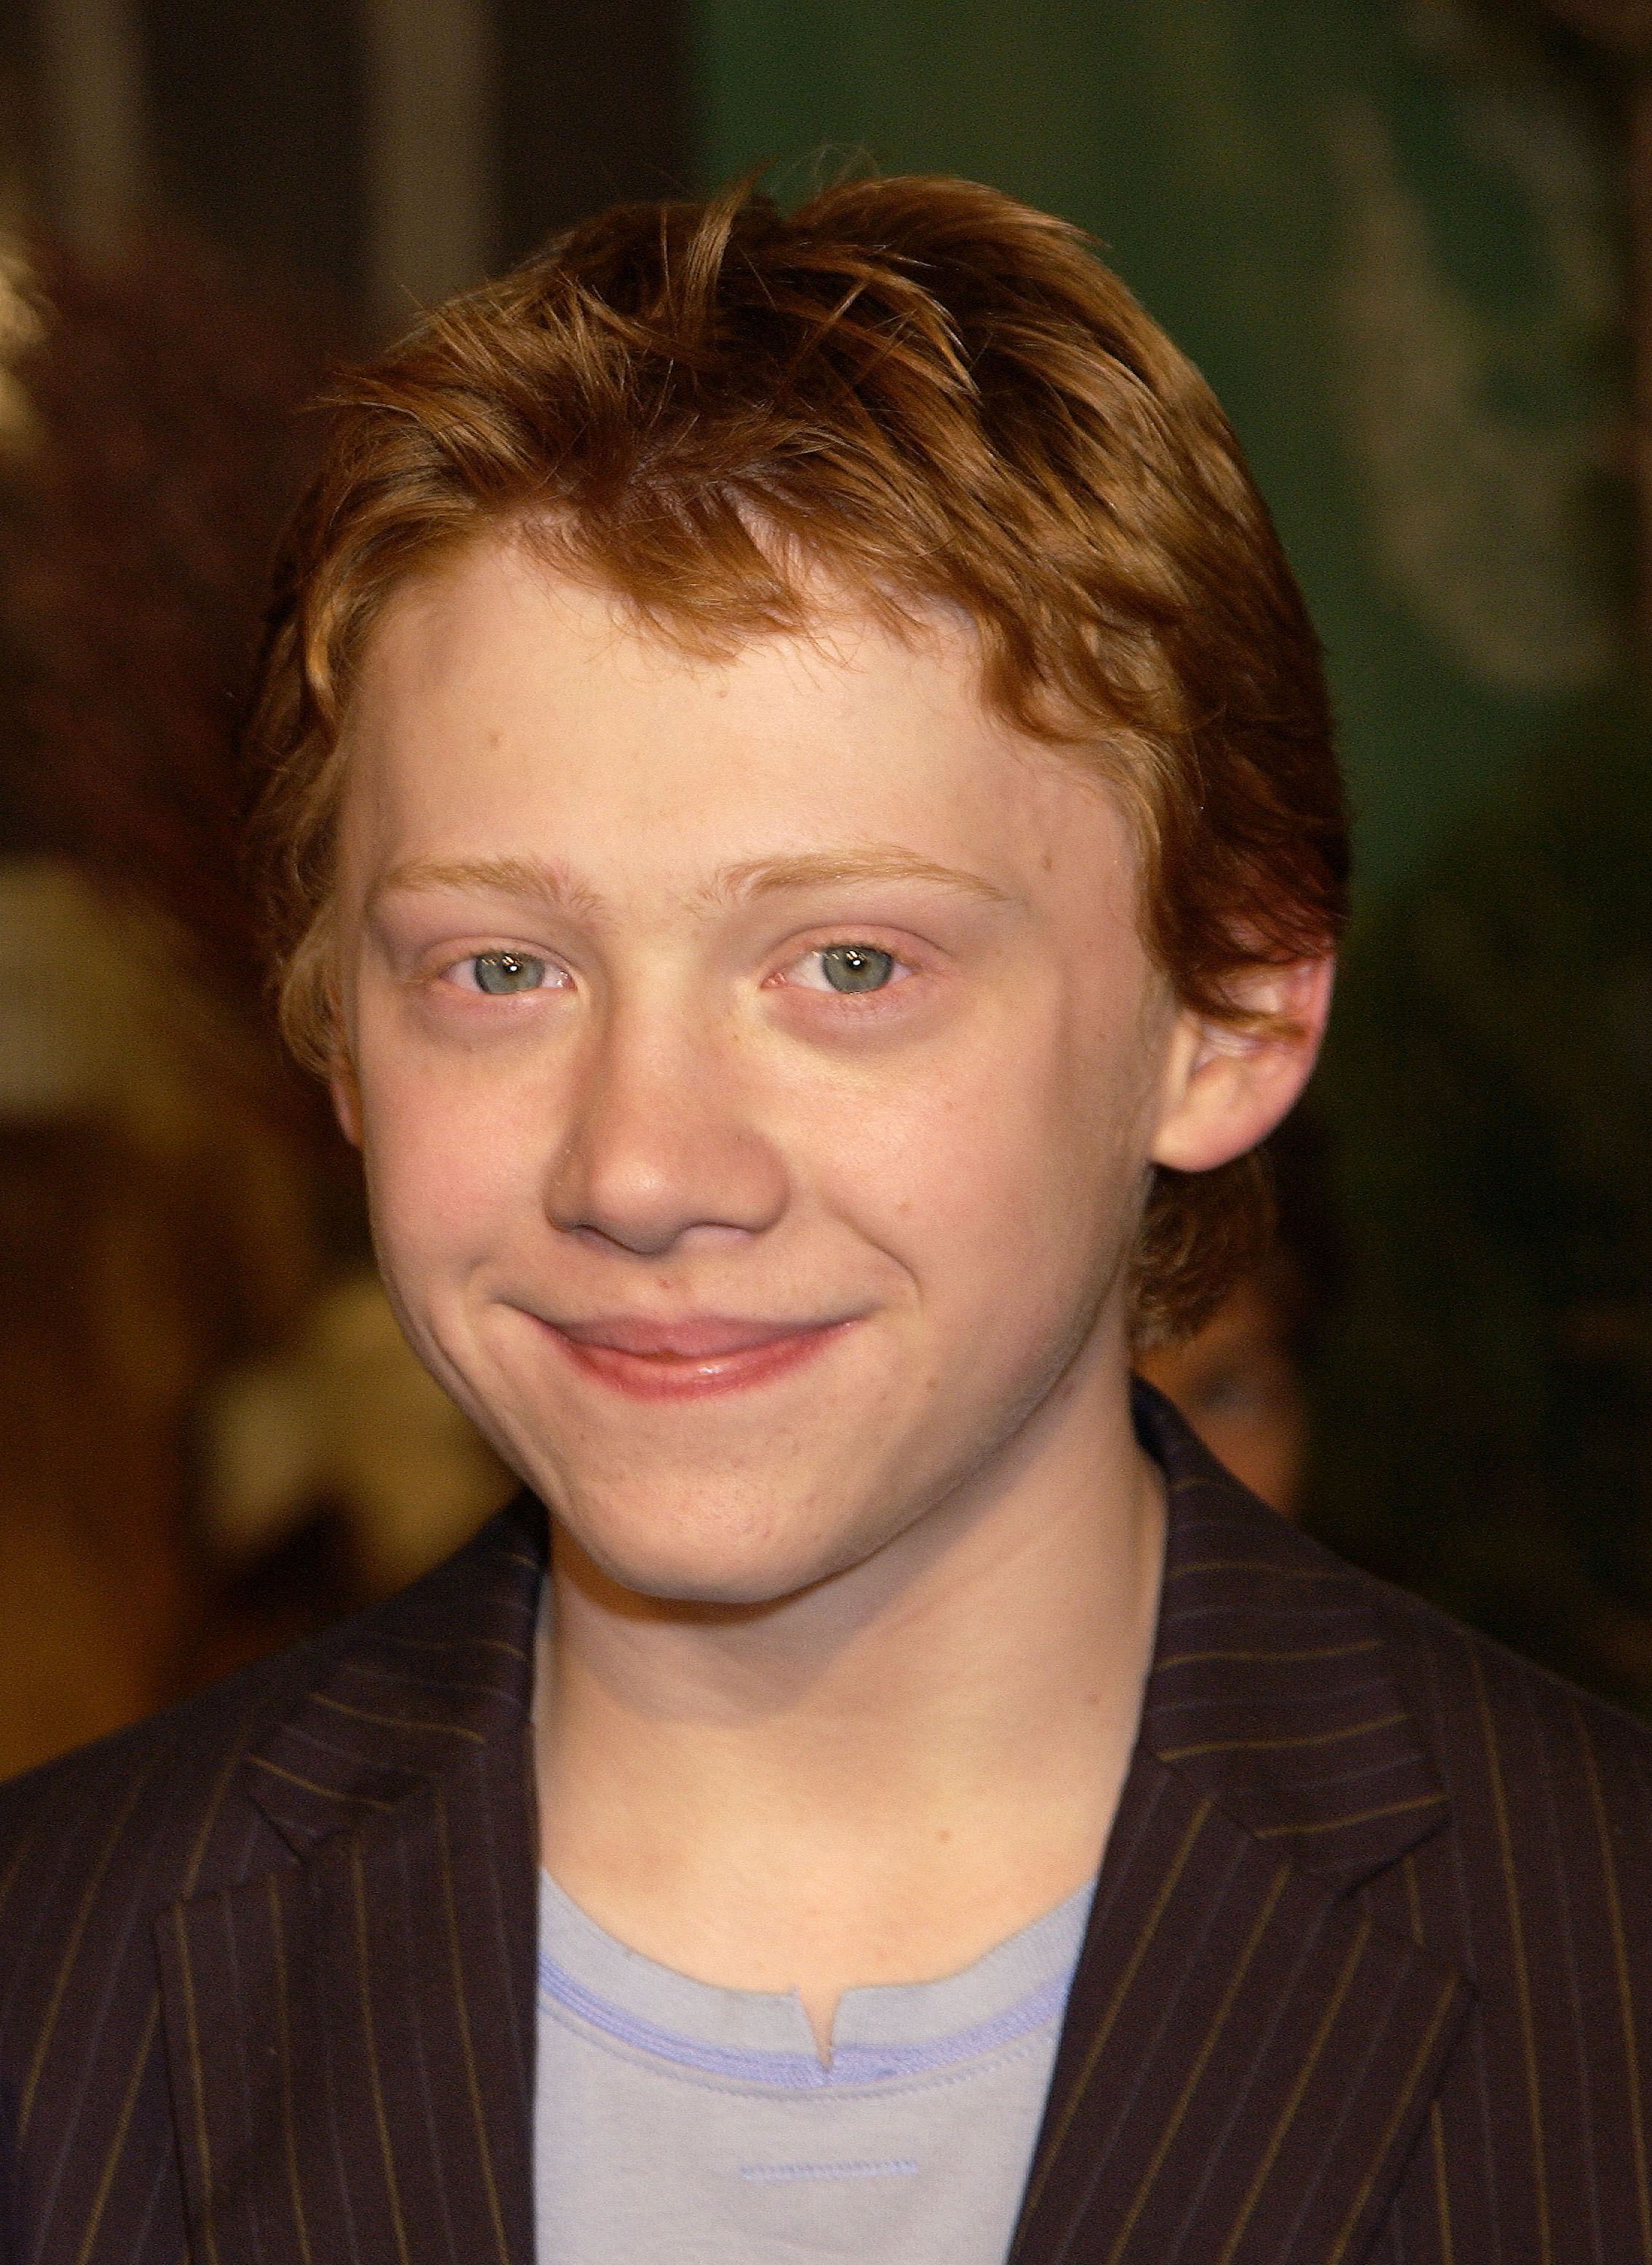 Rupert Grint at the premiere of "Harry Potter and the Chamber of Secrets" in Los Angeles, California in 2002 | Source: Getty Images